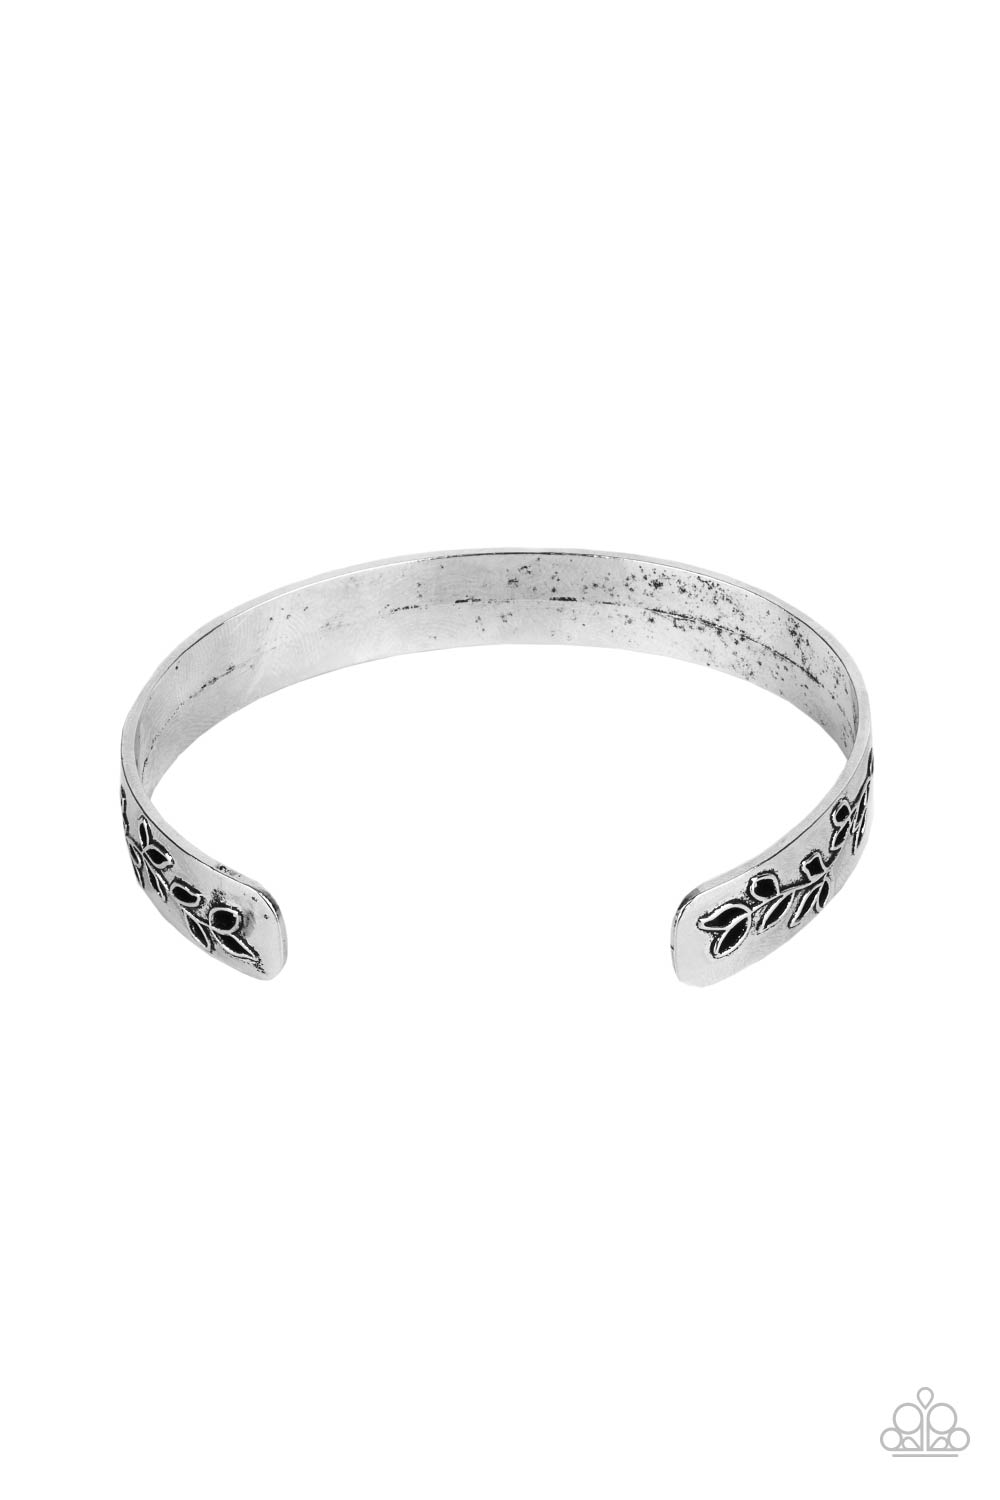 Frond Fable Silver Leaf Cuff Bracelet - Paparazzi Accessories- lightbox - CarasShop.com - $5 Jewelry by Cara Jewels